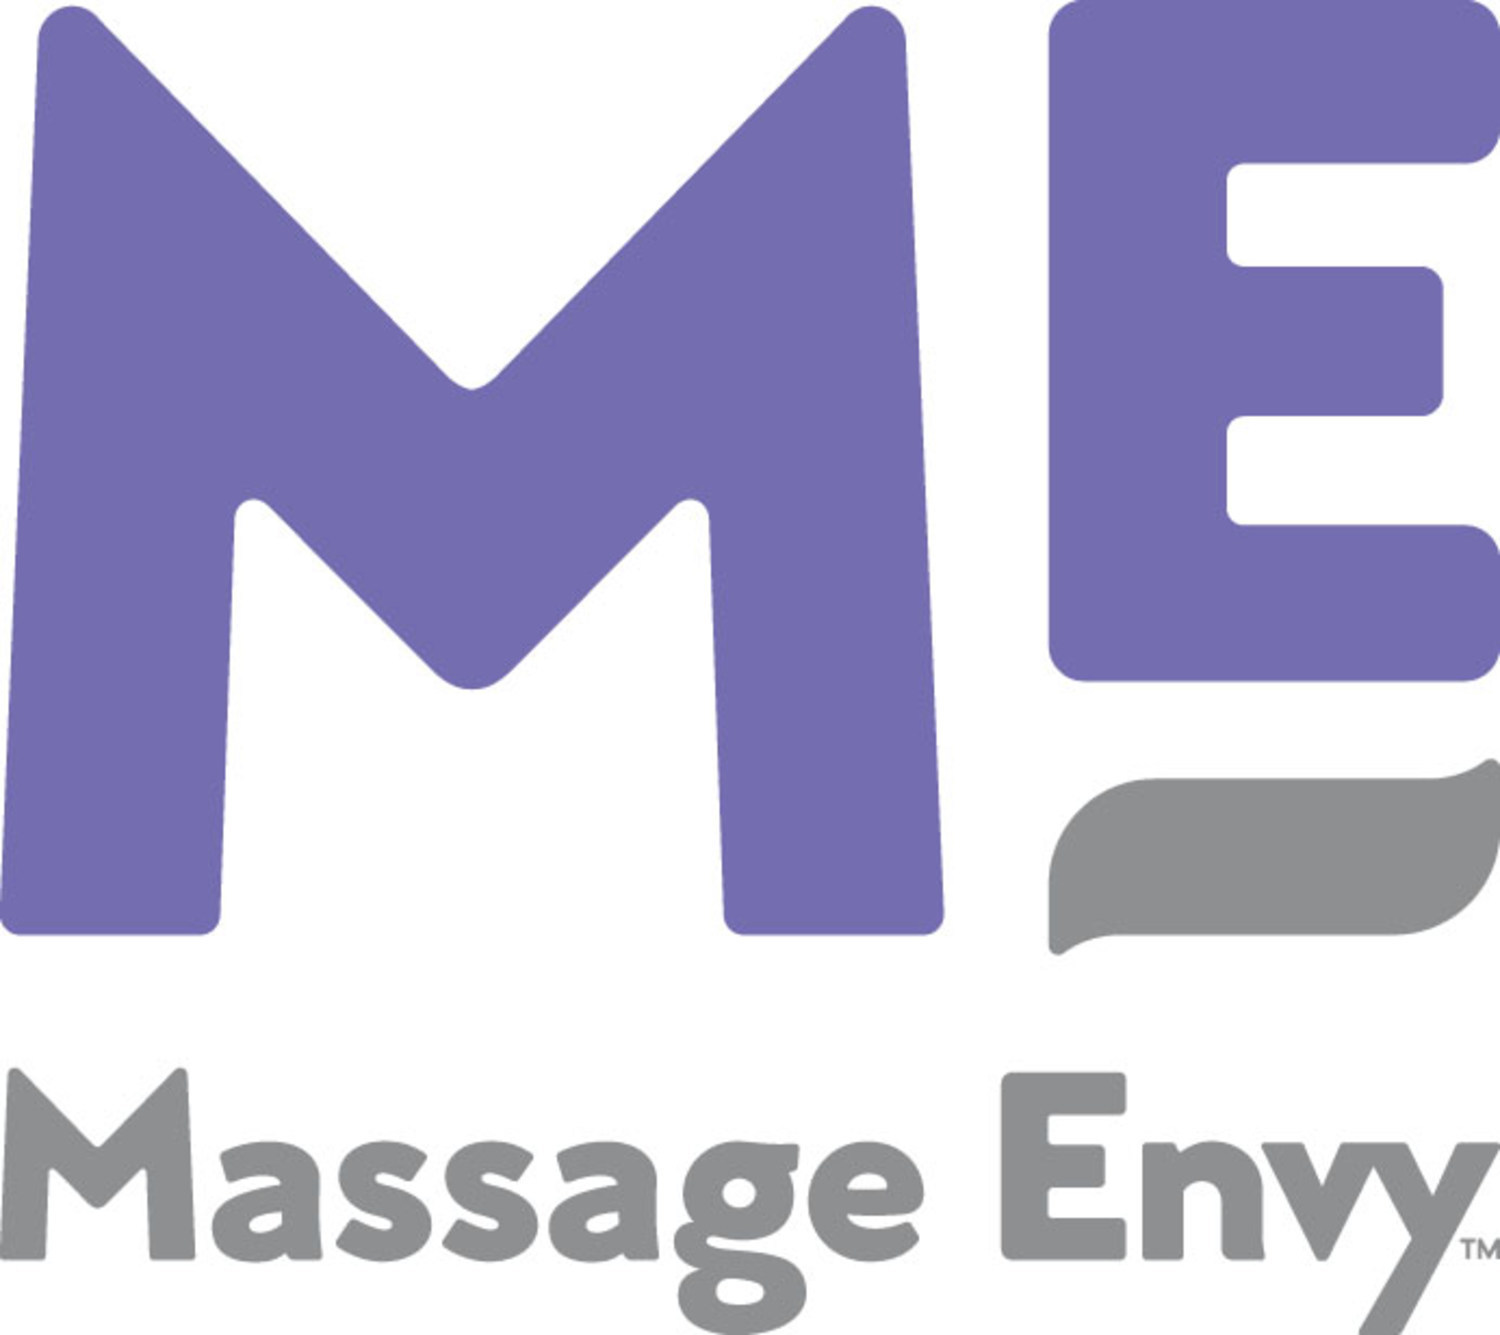 Trivest Partners Signs Deal With Massage Envy To Acquire And Build